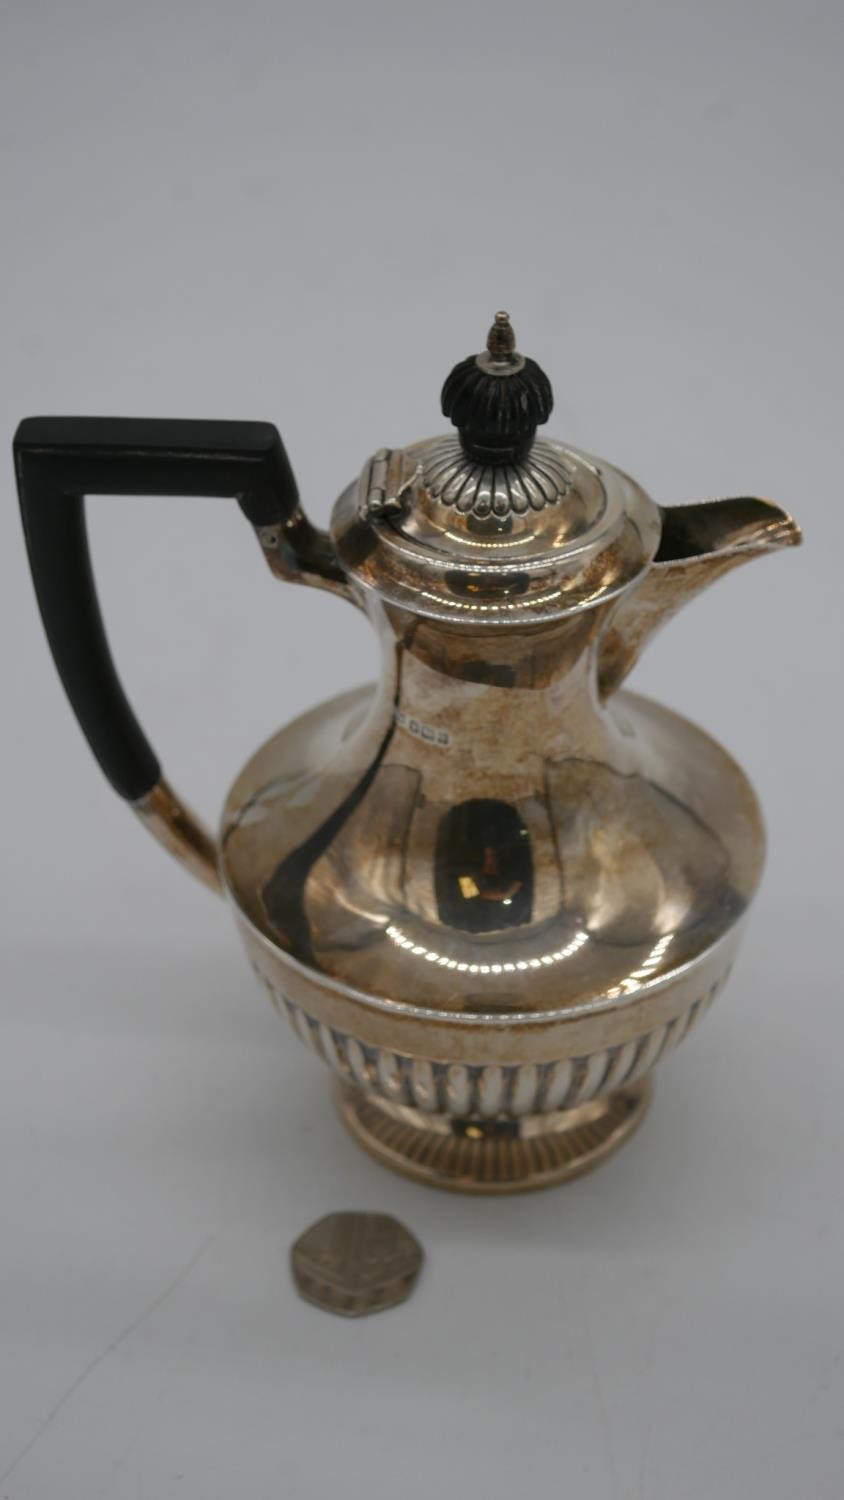 An Edwardian Mappin and Webb sterling silver gadrooned coffee pot with ebony handle. Hallmarked M&W, - Image 2 of 4